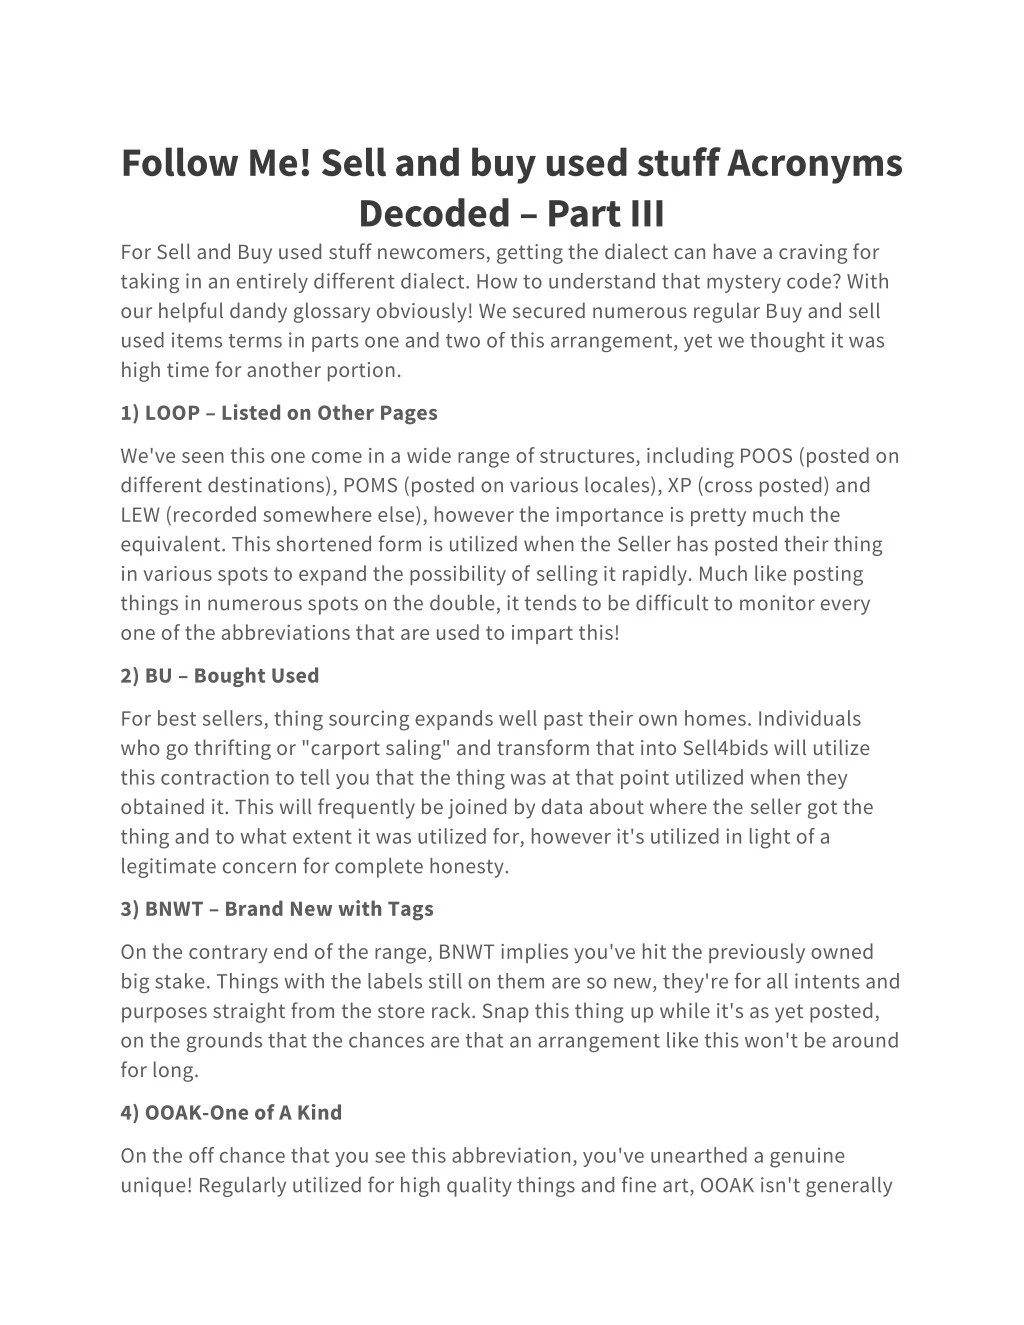 follow me sell and buy used stuff acronyms